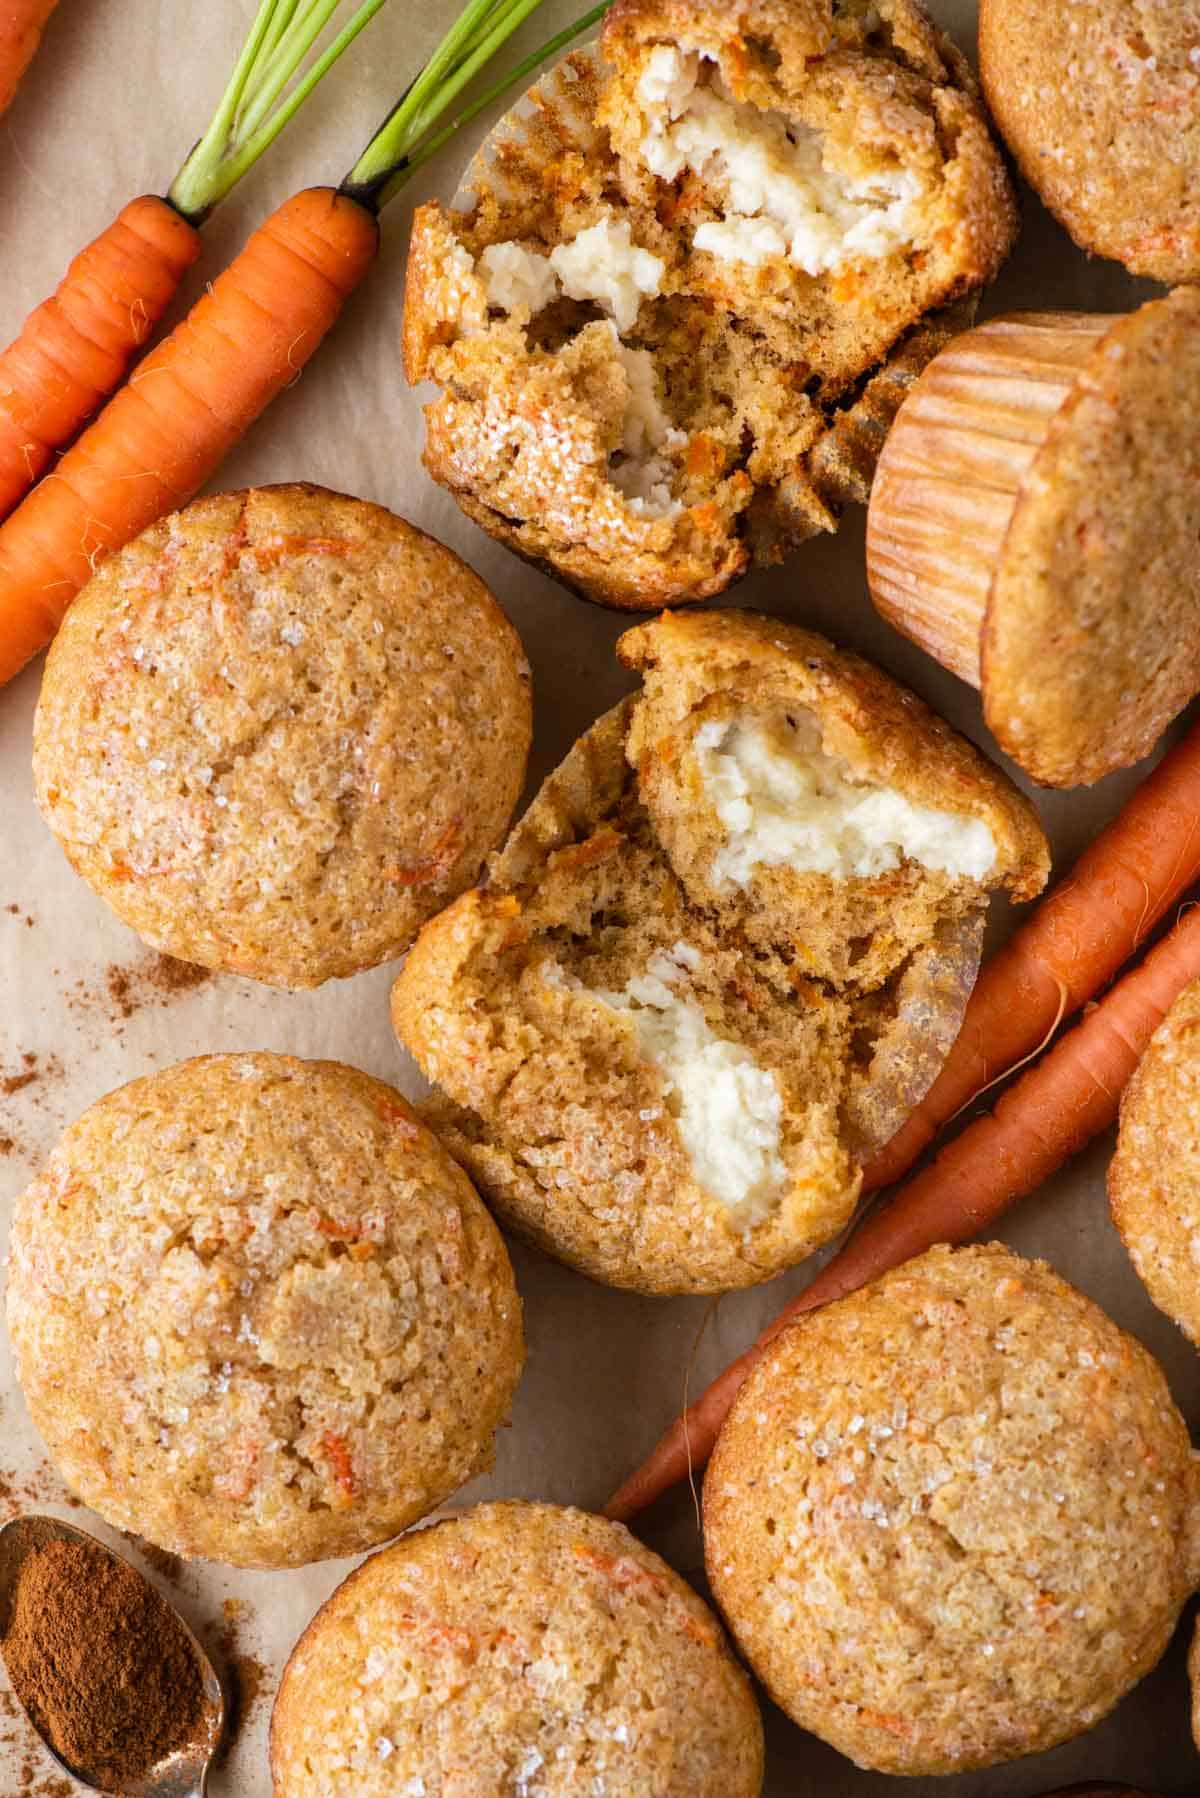 carrot cake muffins arranged around carrots, a spoon of spices, and one muffin broken open to reveal the cream cheese filling inside